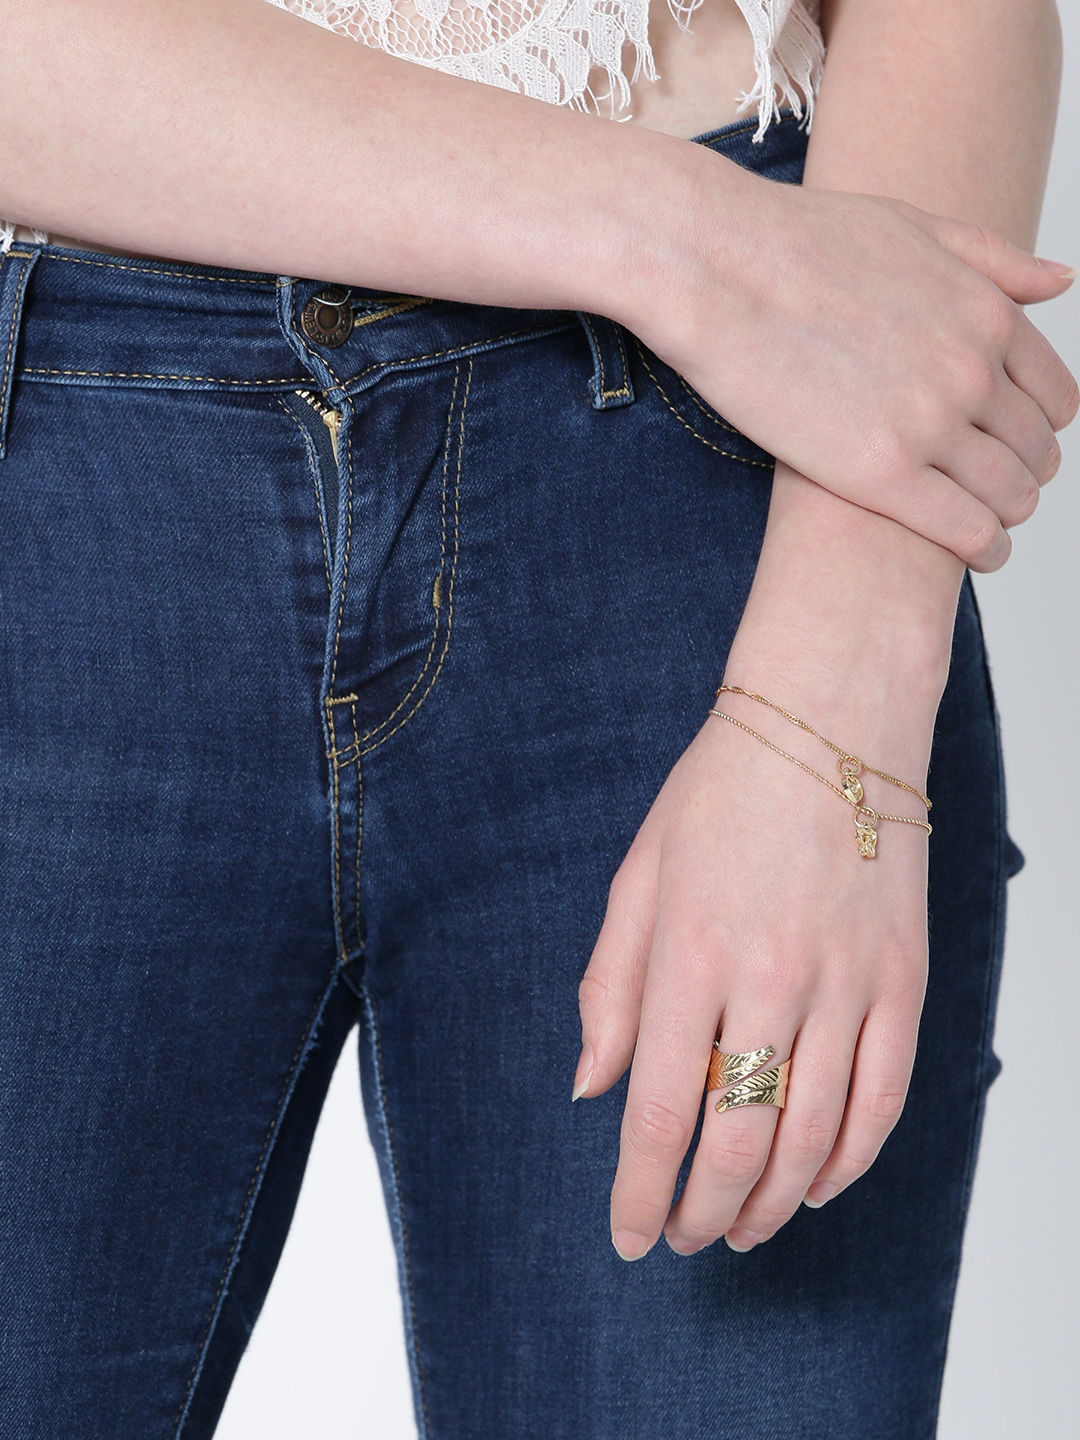 Matching Gold Bracelet And Ring Sets: A Perfect Gift Idea!